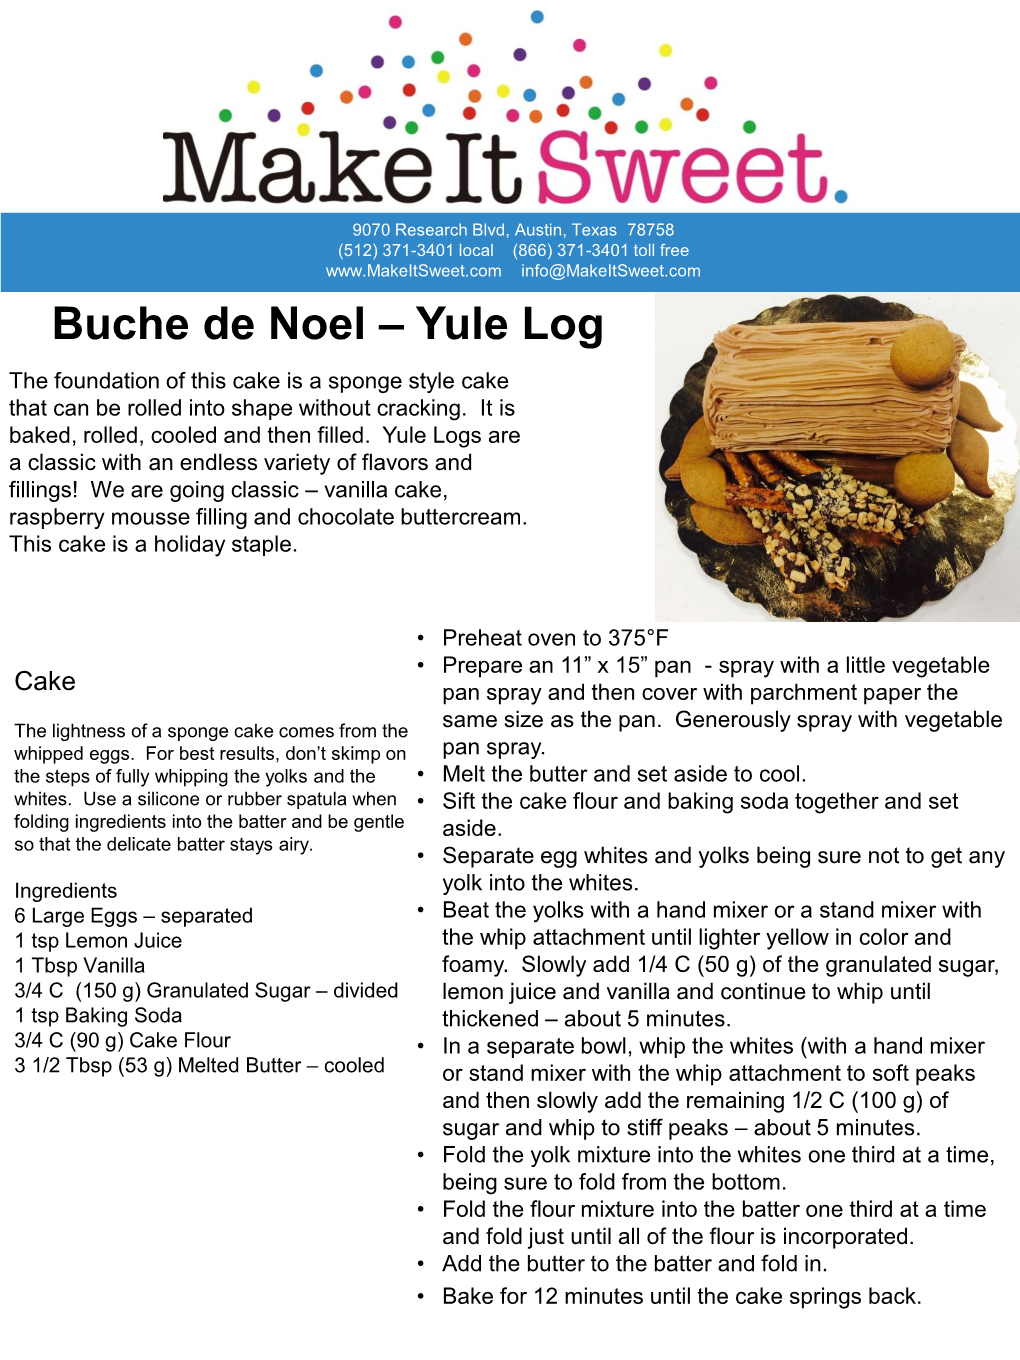 Buche De Noel – Yule Log the Foundation of This Cake Is a Sponge Style Cake That Can Be Rolled Into Shape Without Cracking